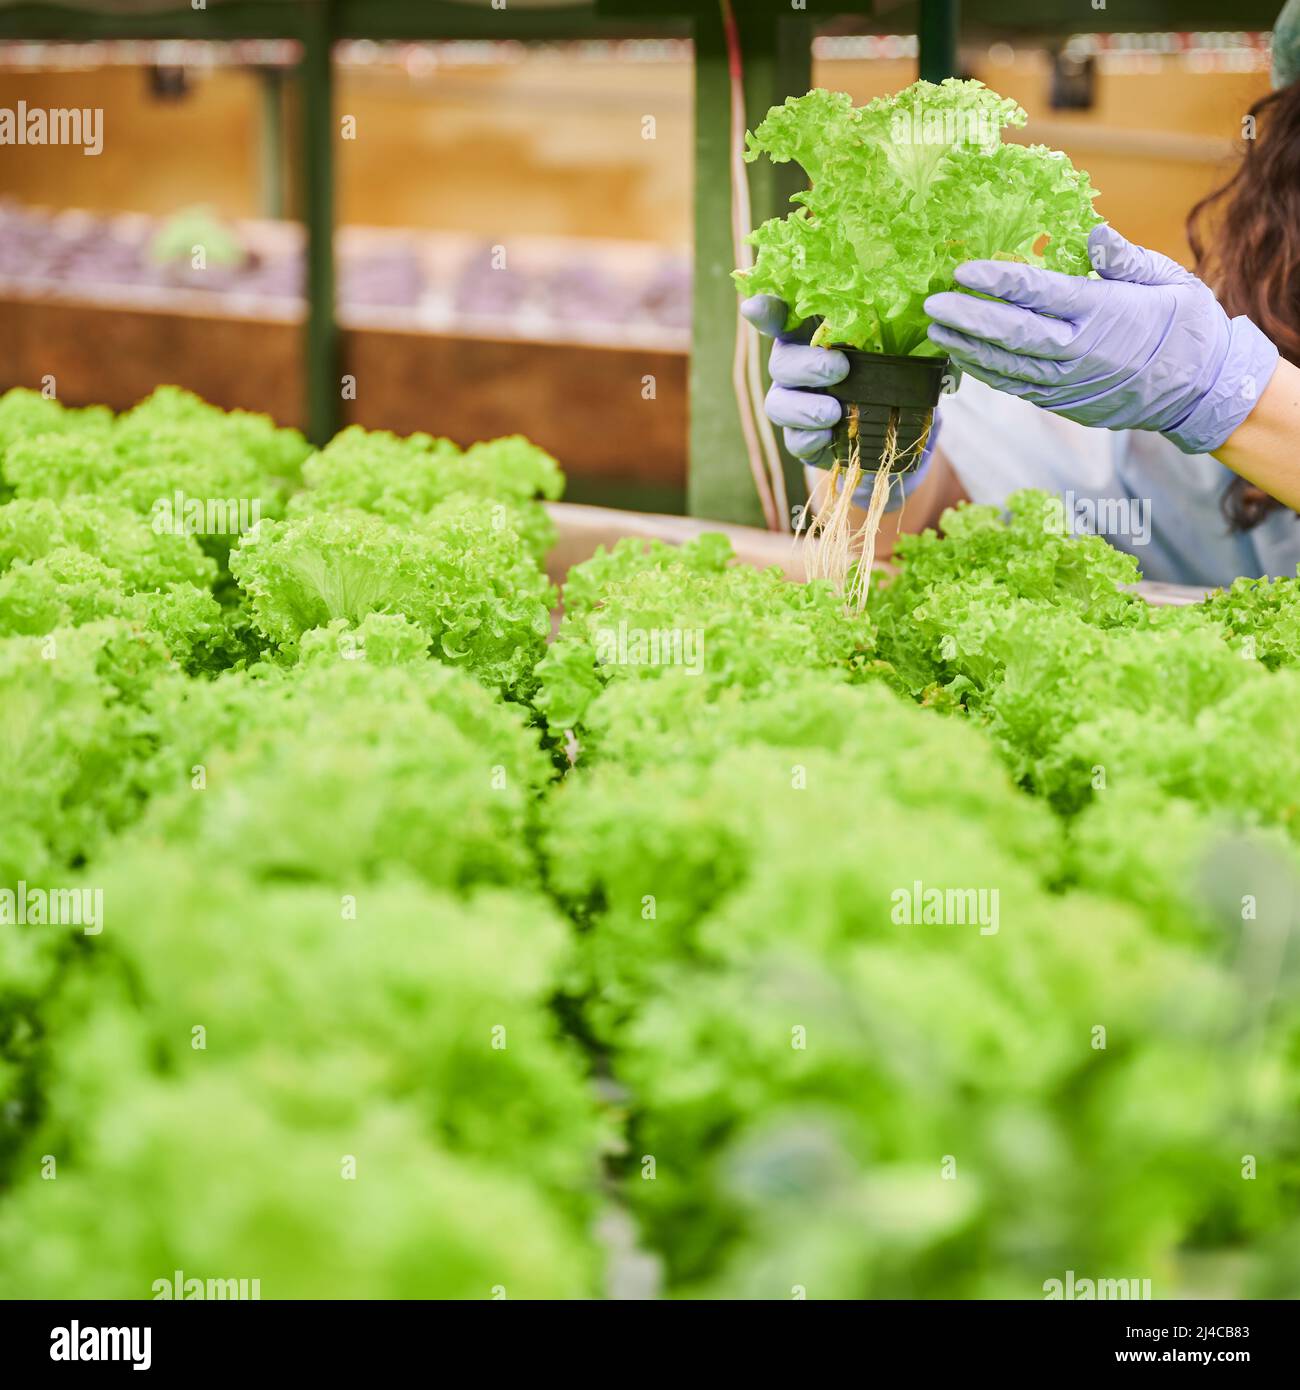 Gardener holding pot with salad seedlings in greenhouse. Close up of woman hands in sterile garden gloves checking green leafy plant. Stock Photo